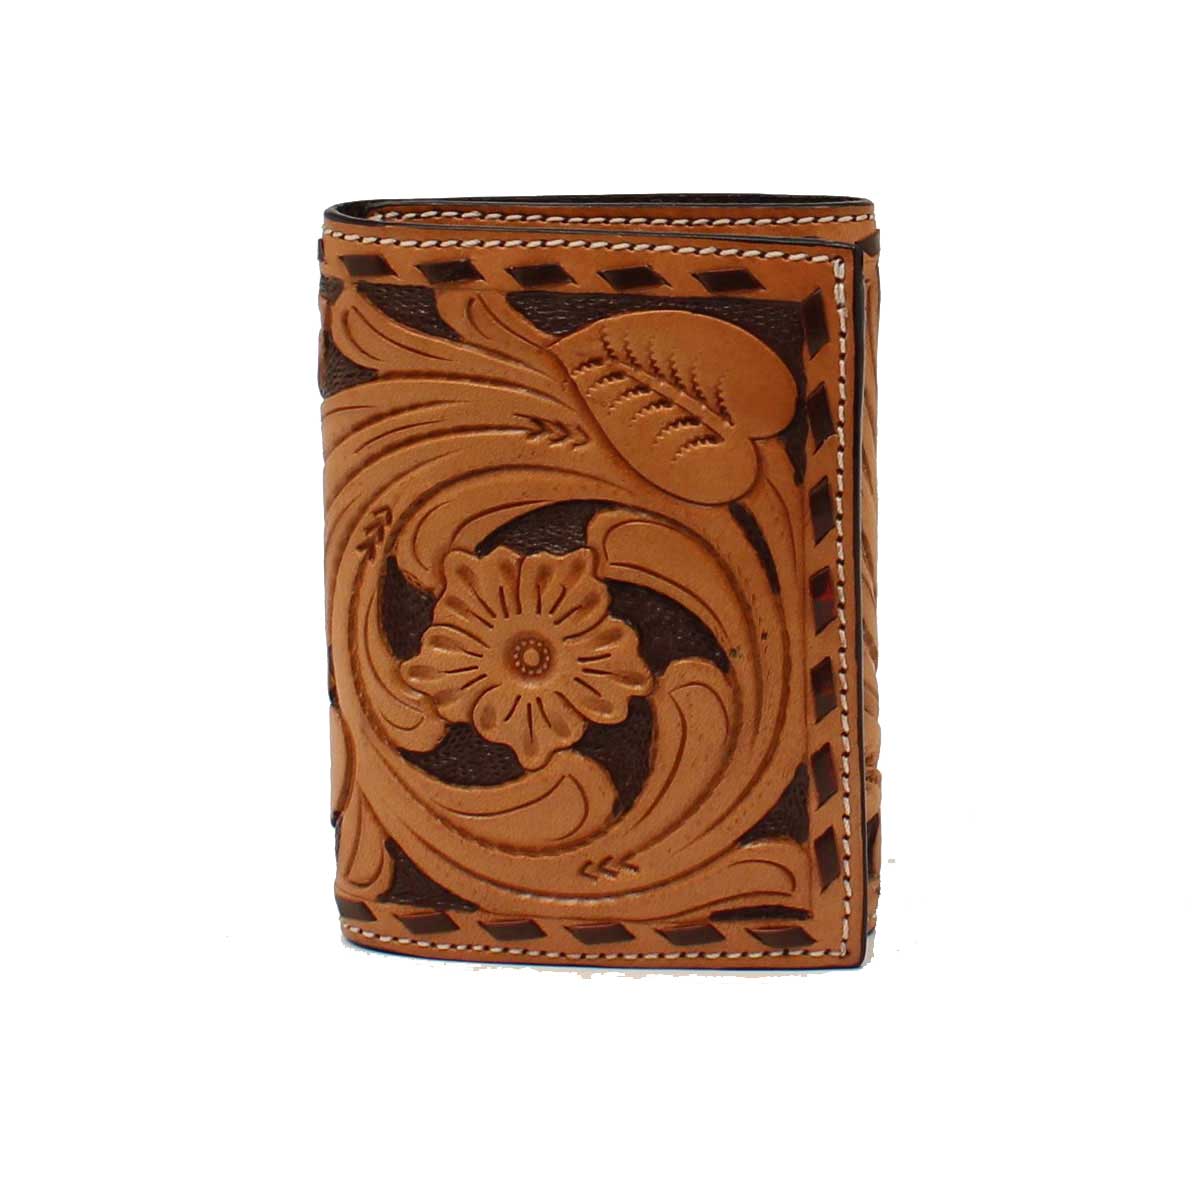 Stylish Brown Leather Wallet for Men - MEN'S VECTOR